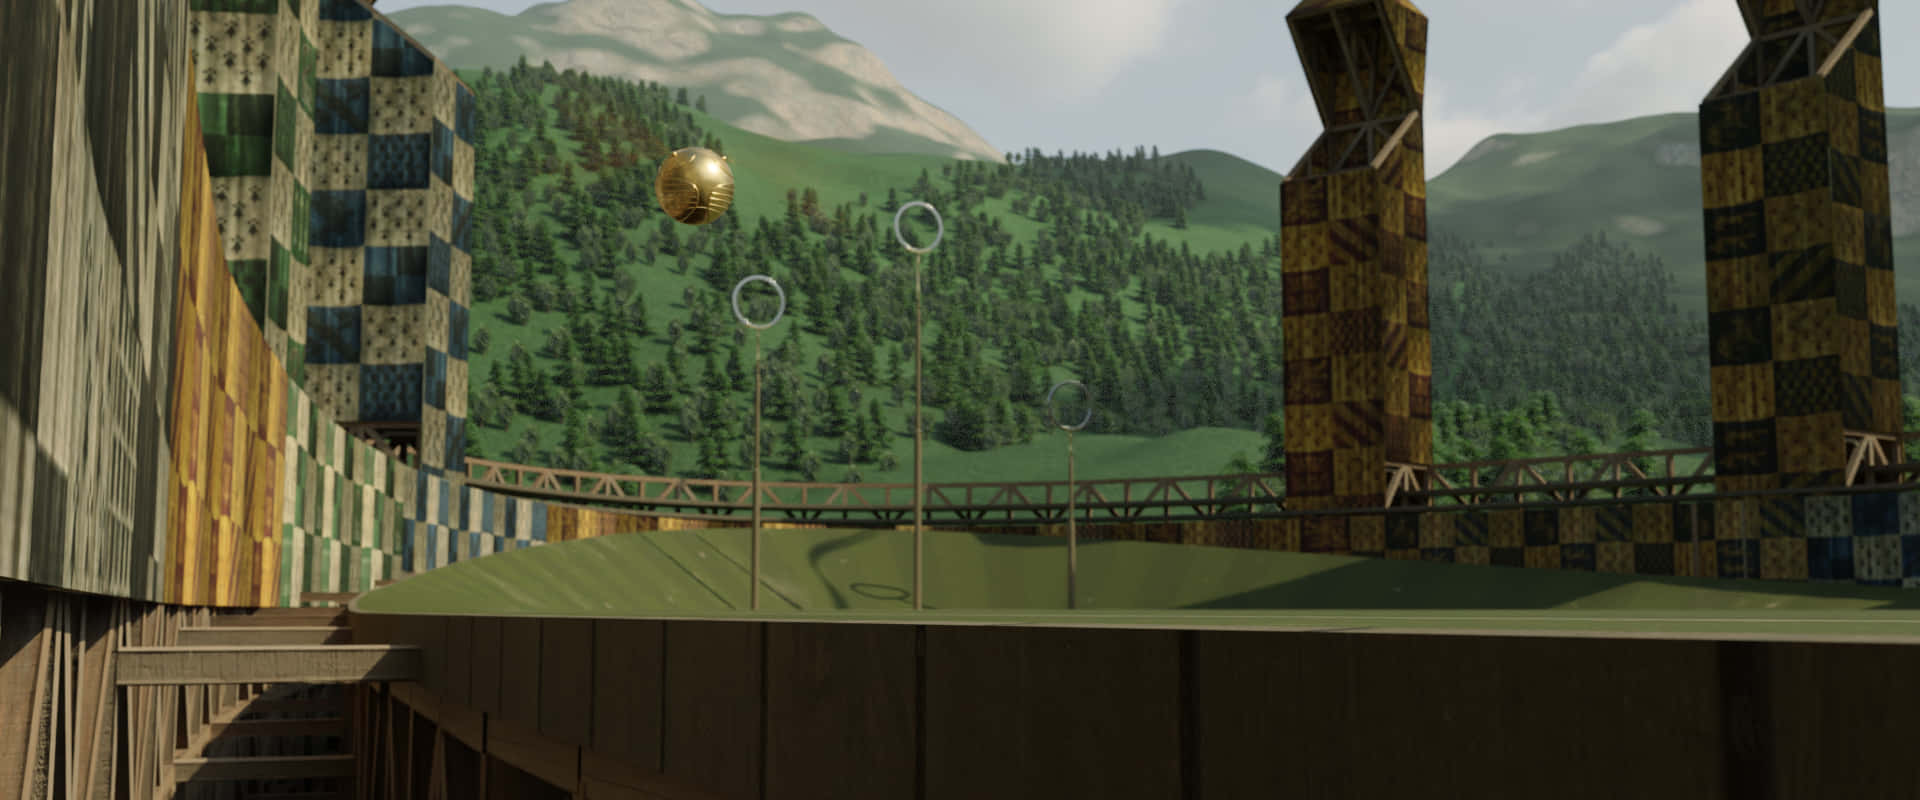 Witness the intensifying action on the spectacular Quidditch Pitch of Hogwarts. Wallpaper